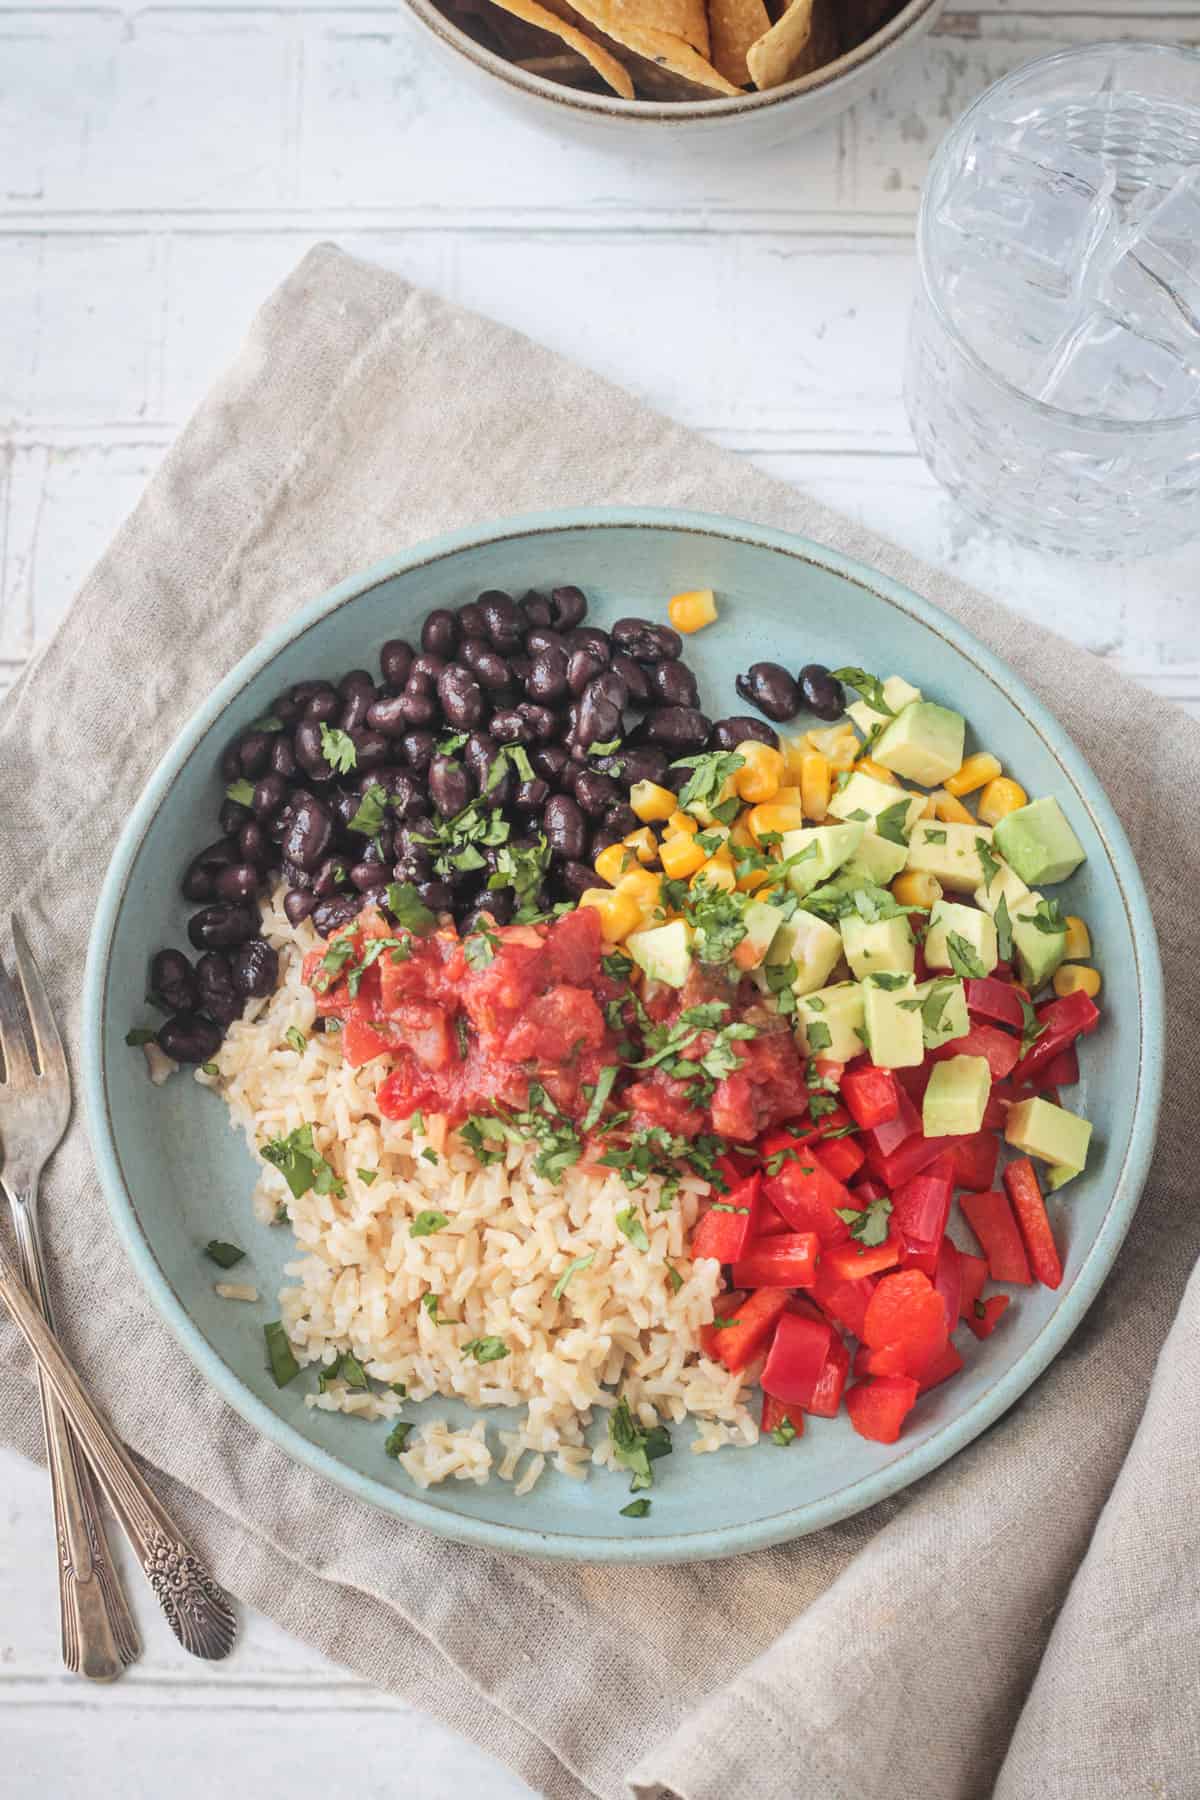 Vegan burrito bowl with rice, beans, corn, peppers, salsa, and avocado on a plate.